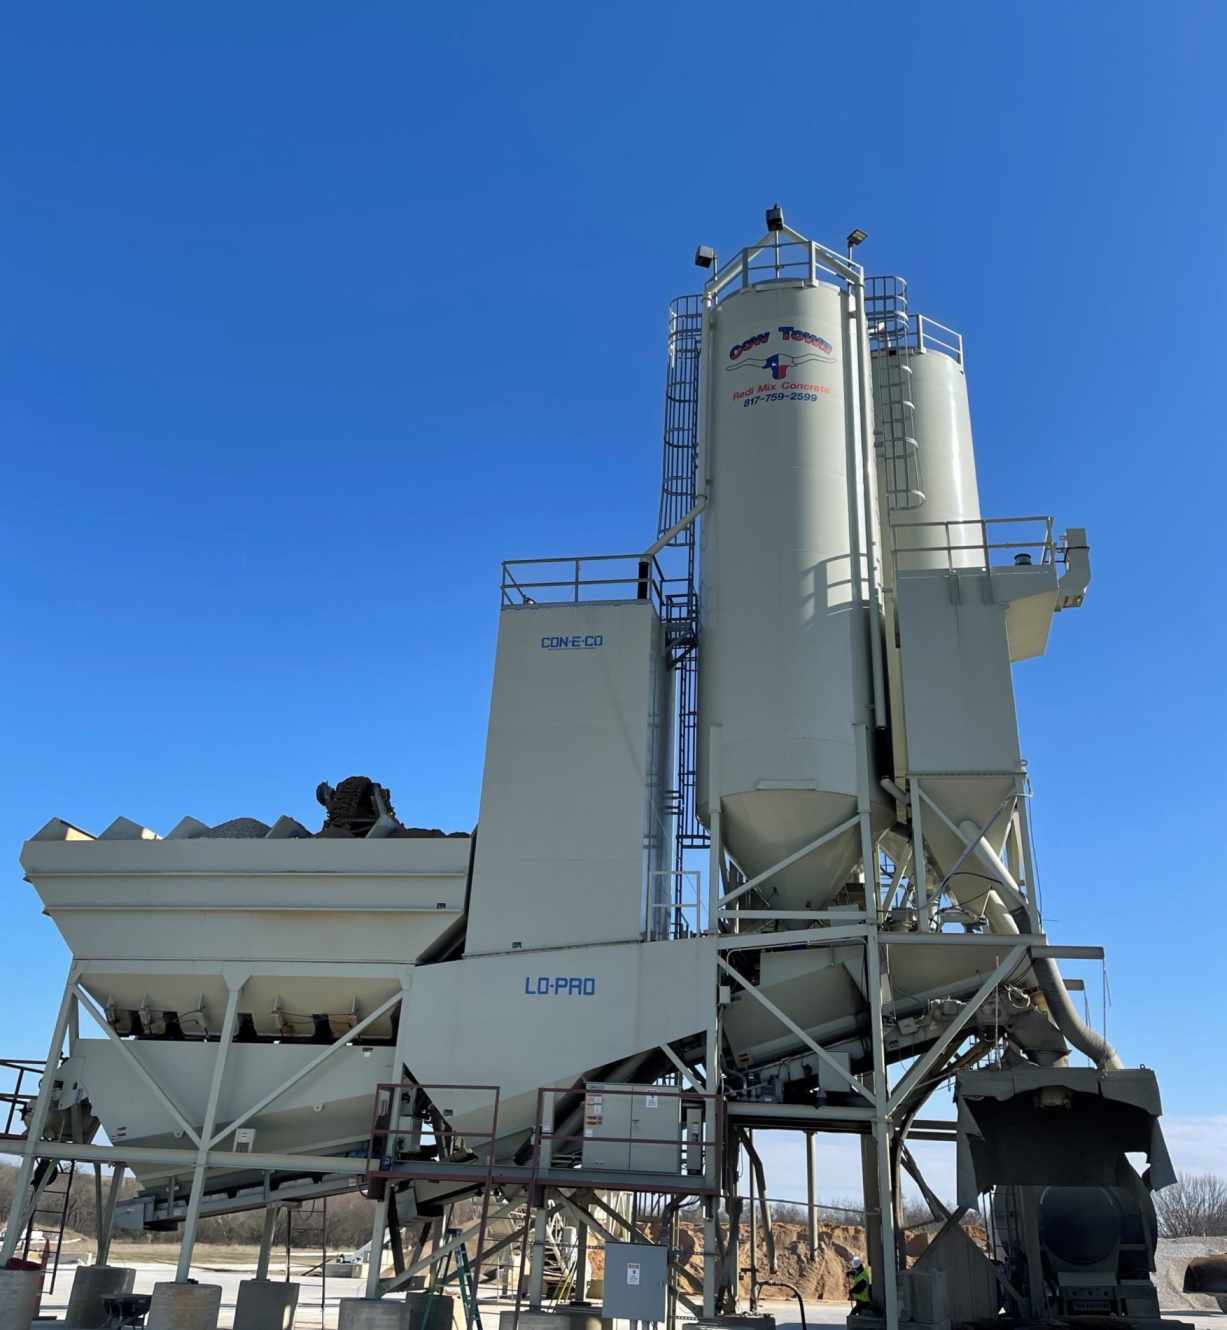 Concrete Mixer Delivery - Cowtown Ready Mix Services in McKinney, Plant Construction